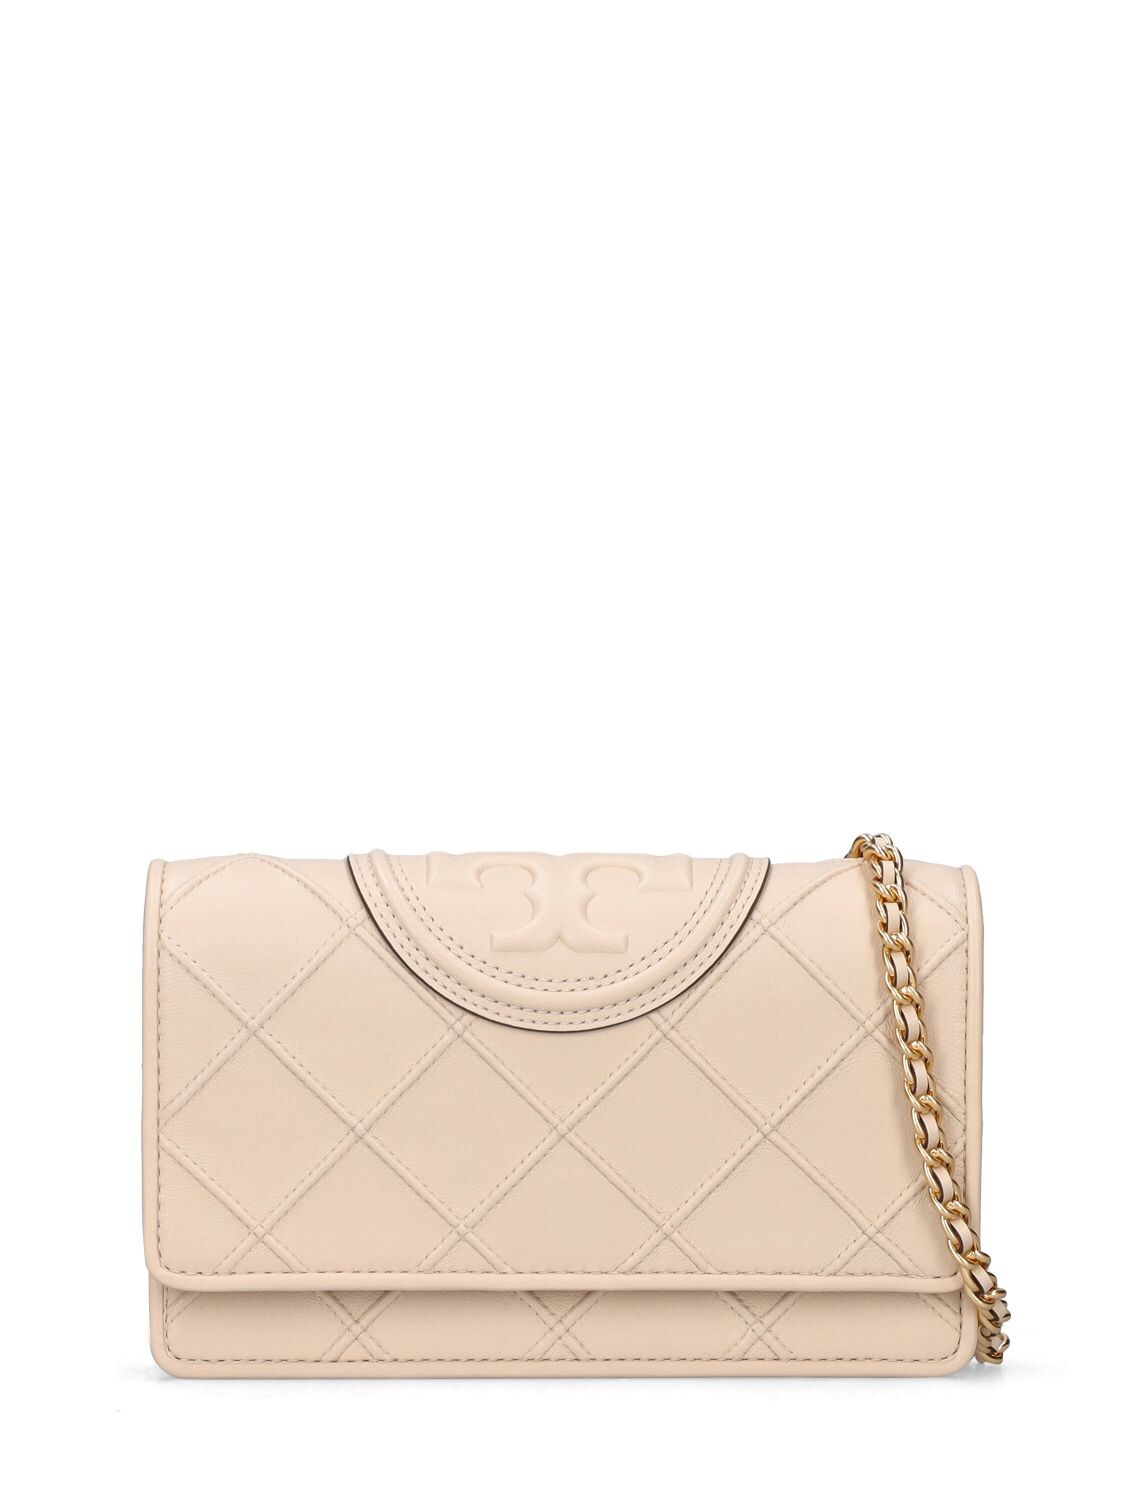 Tory Burch Fleming Chain Soft Leather Wallet Bag In New Cream